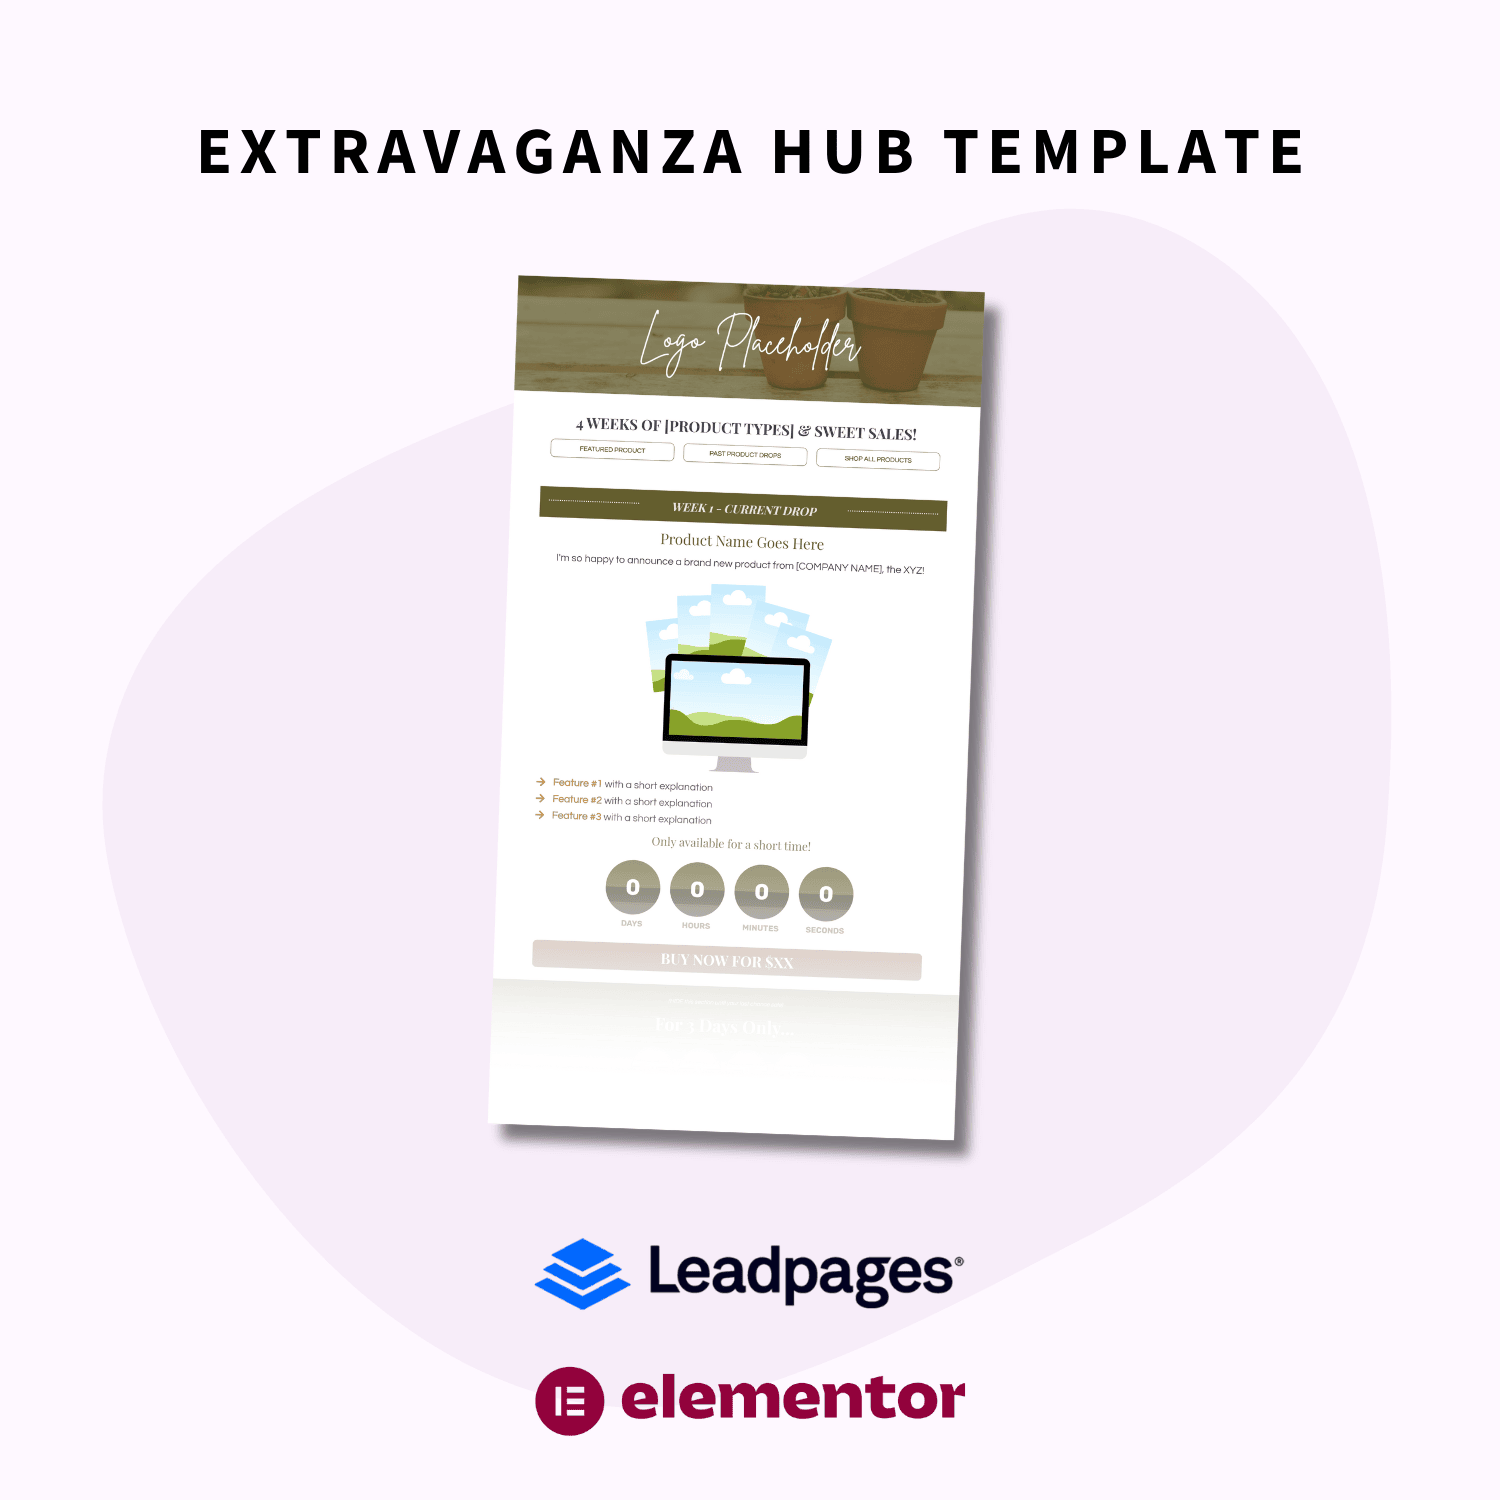 extravaganza hub template in leadpages and elementor in the Digital Product Extravaganza Toolbox